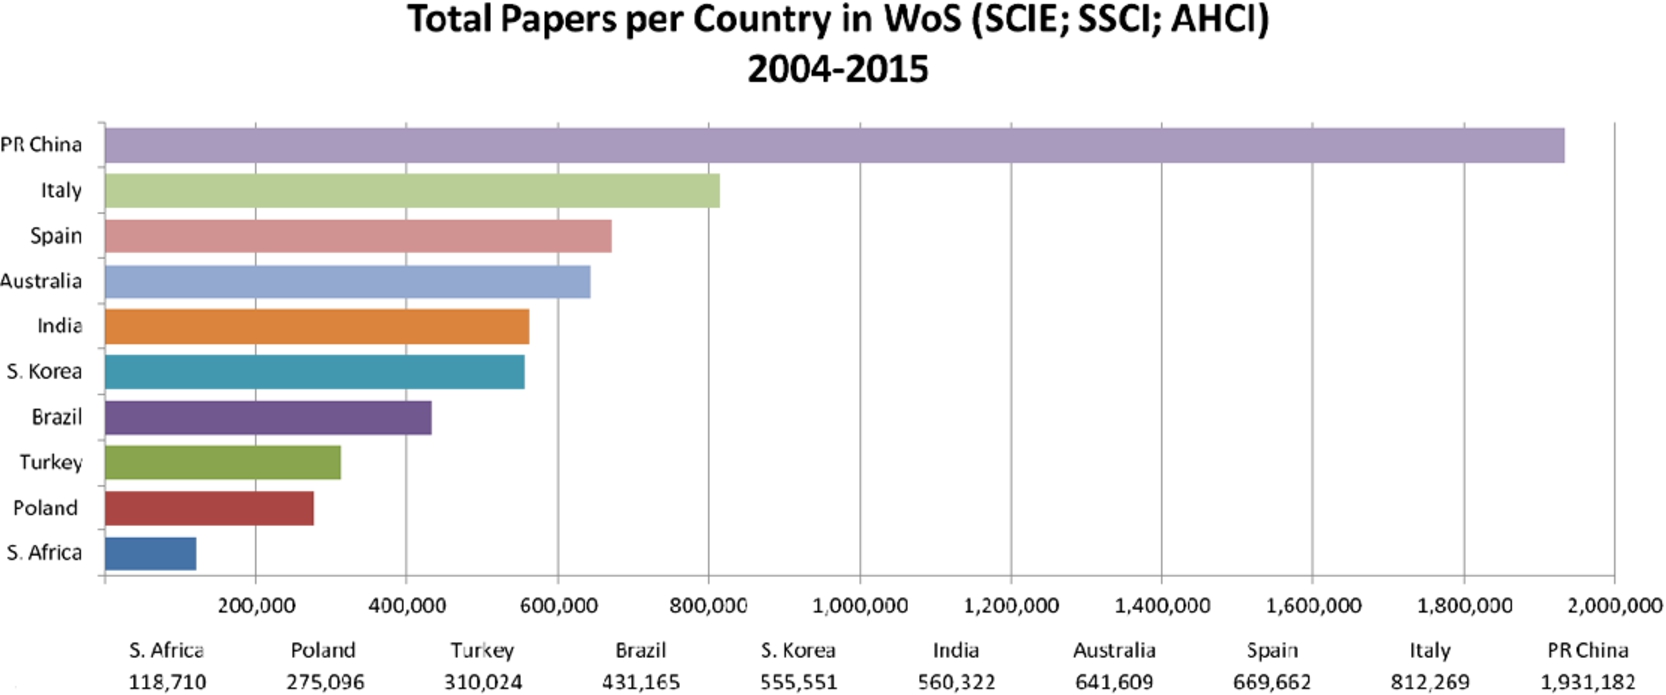 Total papers per country in WoS (SCIE; SSCI; AHCI) 2004–2015.